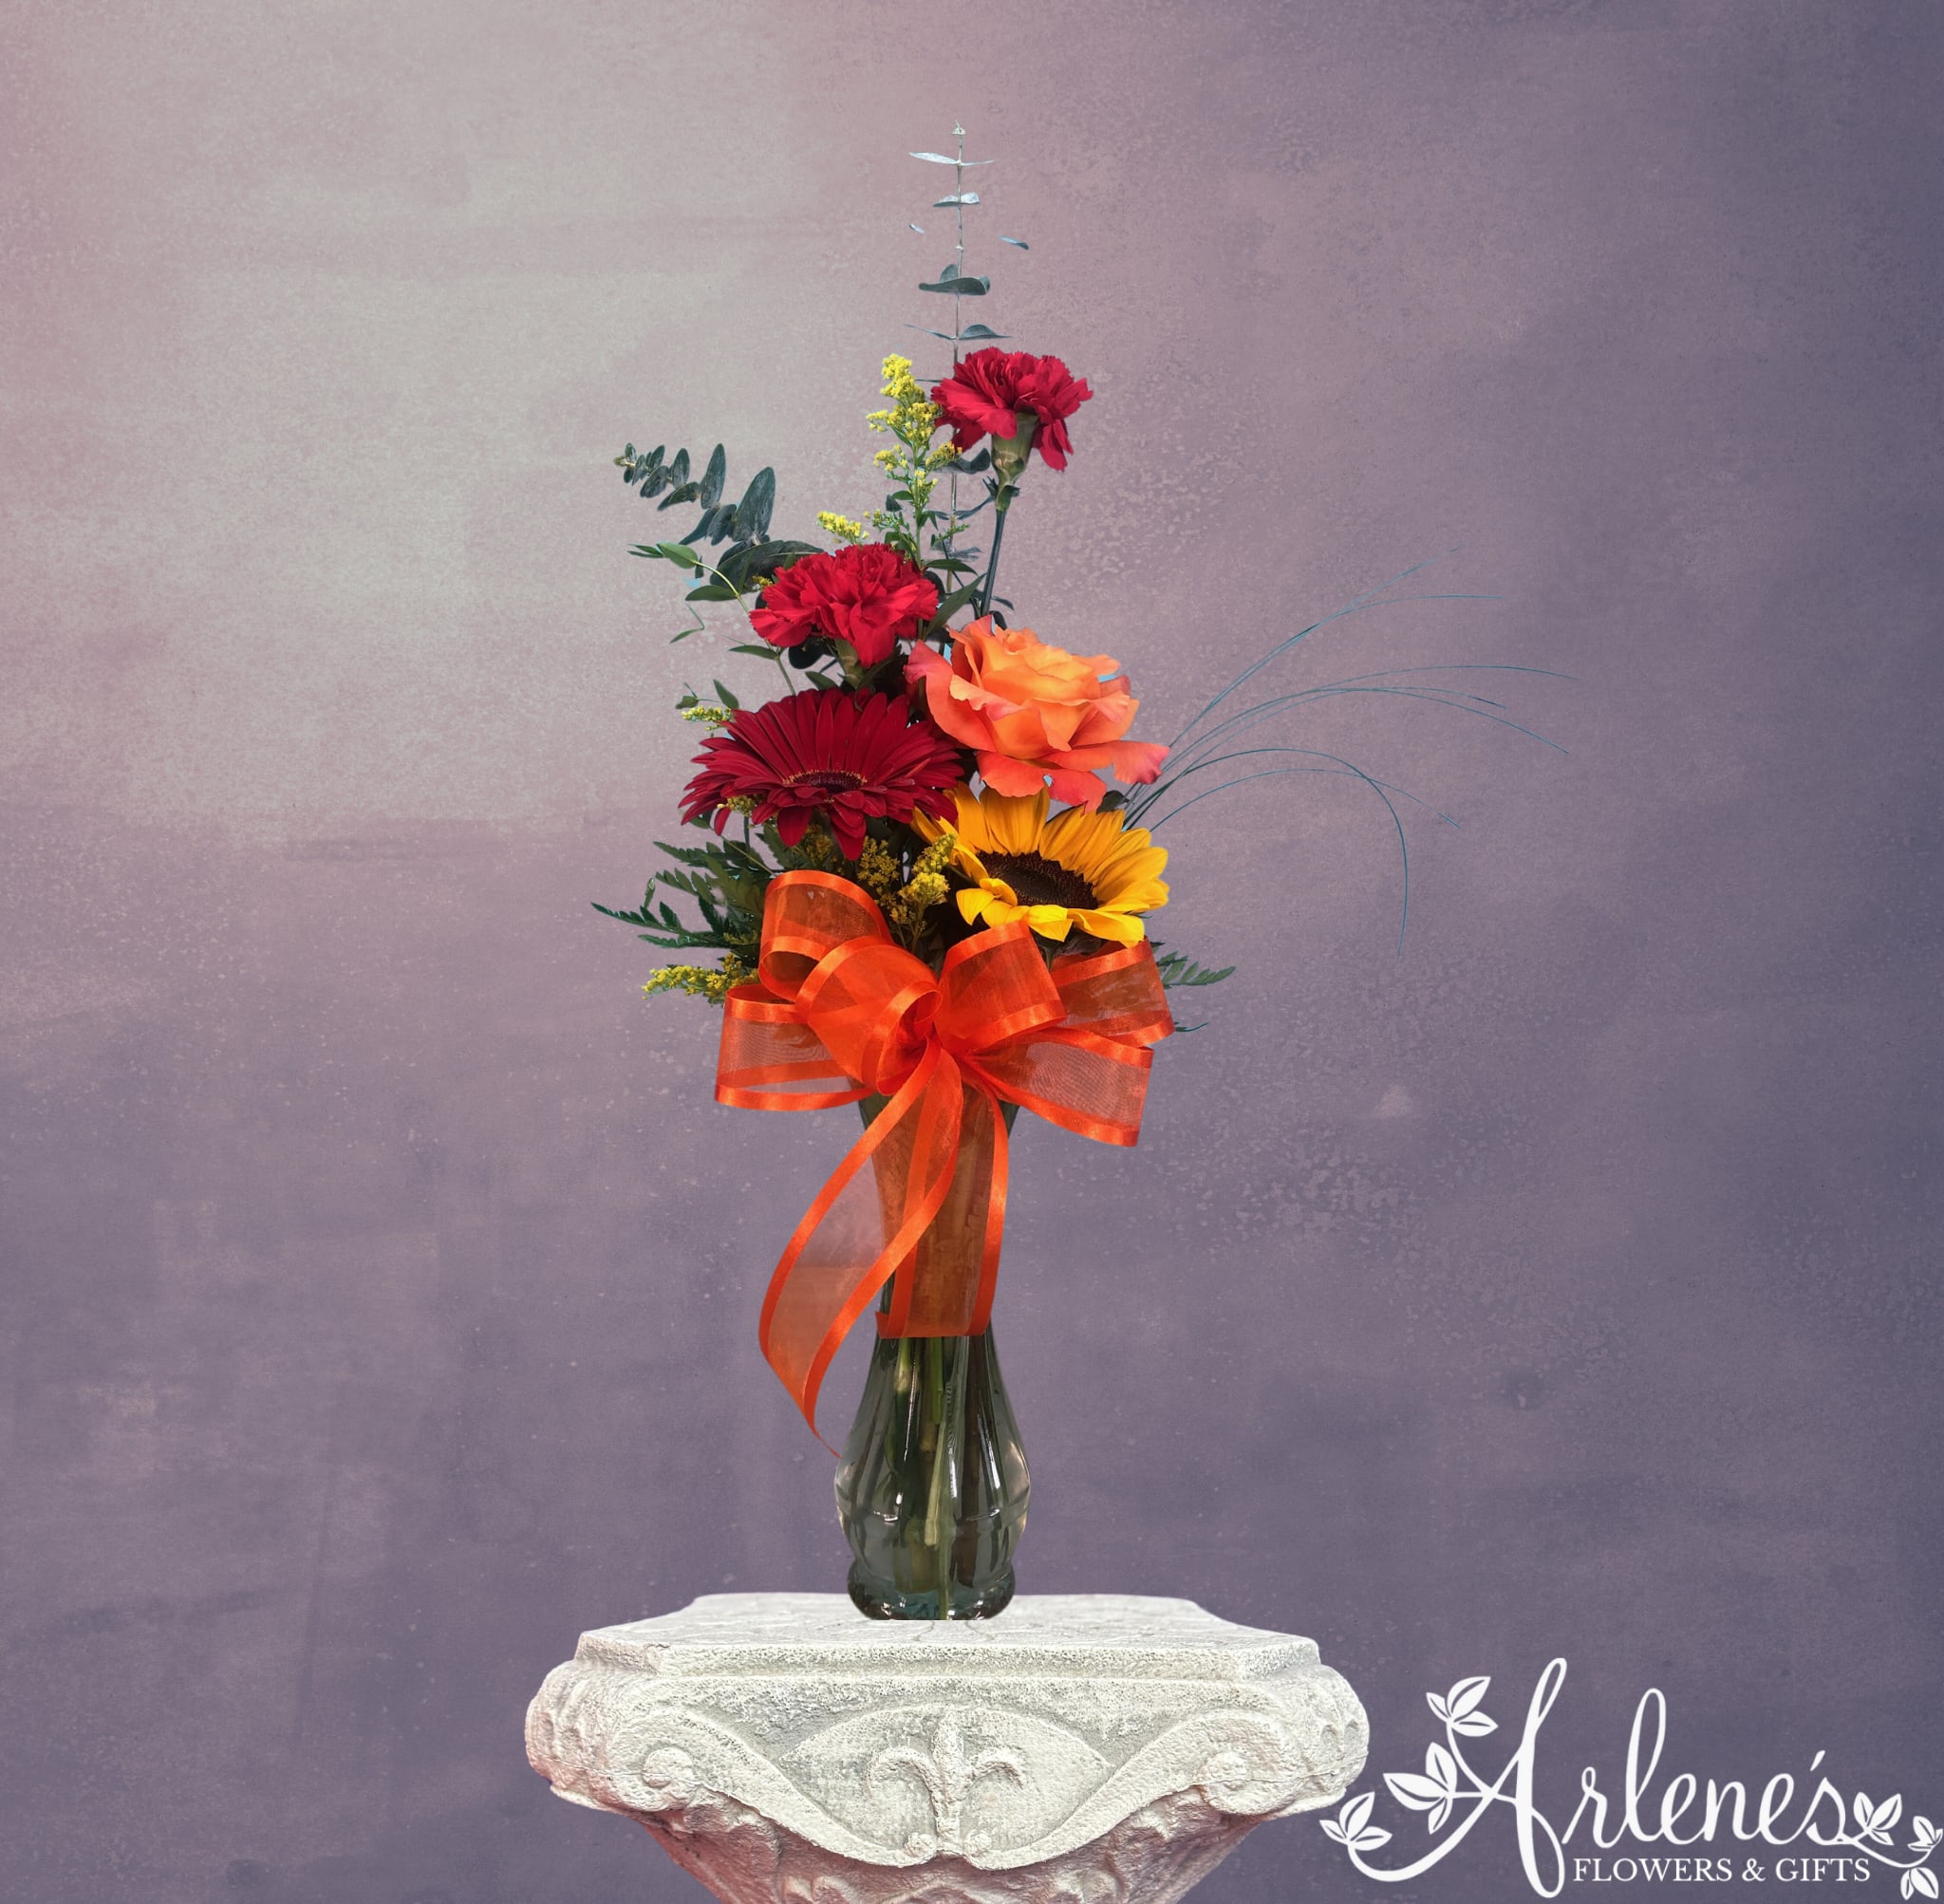  Sampler Budvase - If you choose this option, we will choose the color scheme and flowers, this is just a sample of what a bouquet looks like at this price point. 